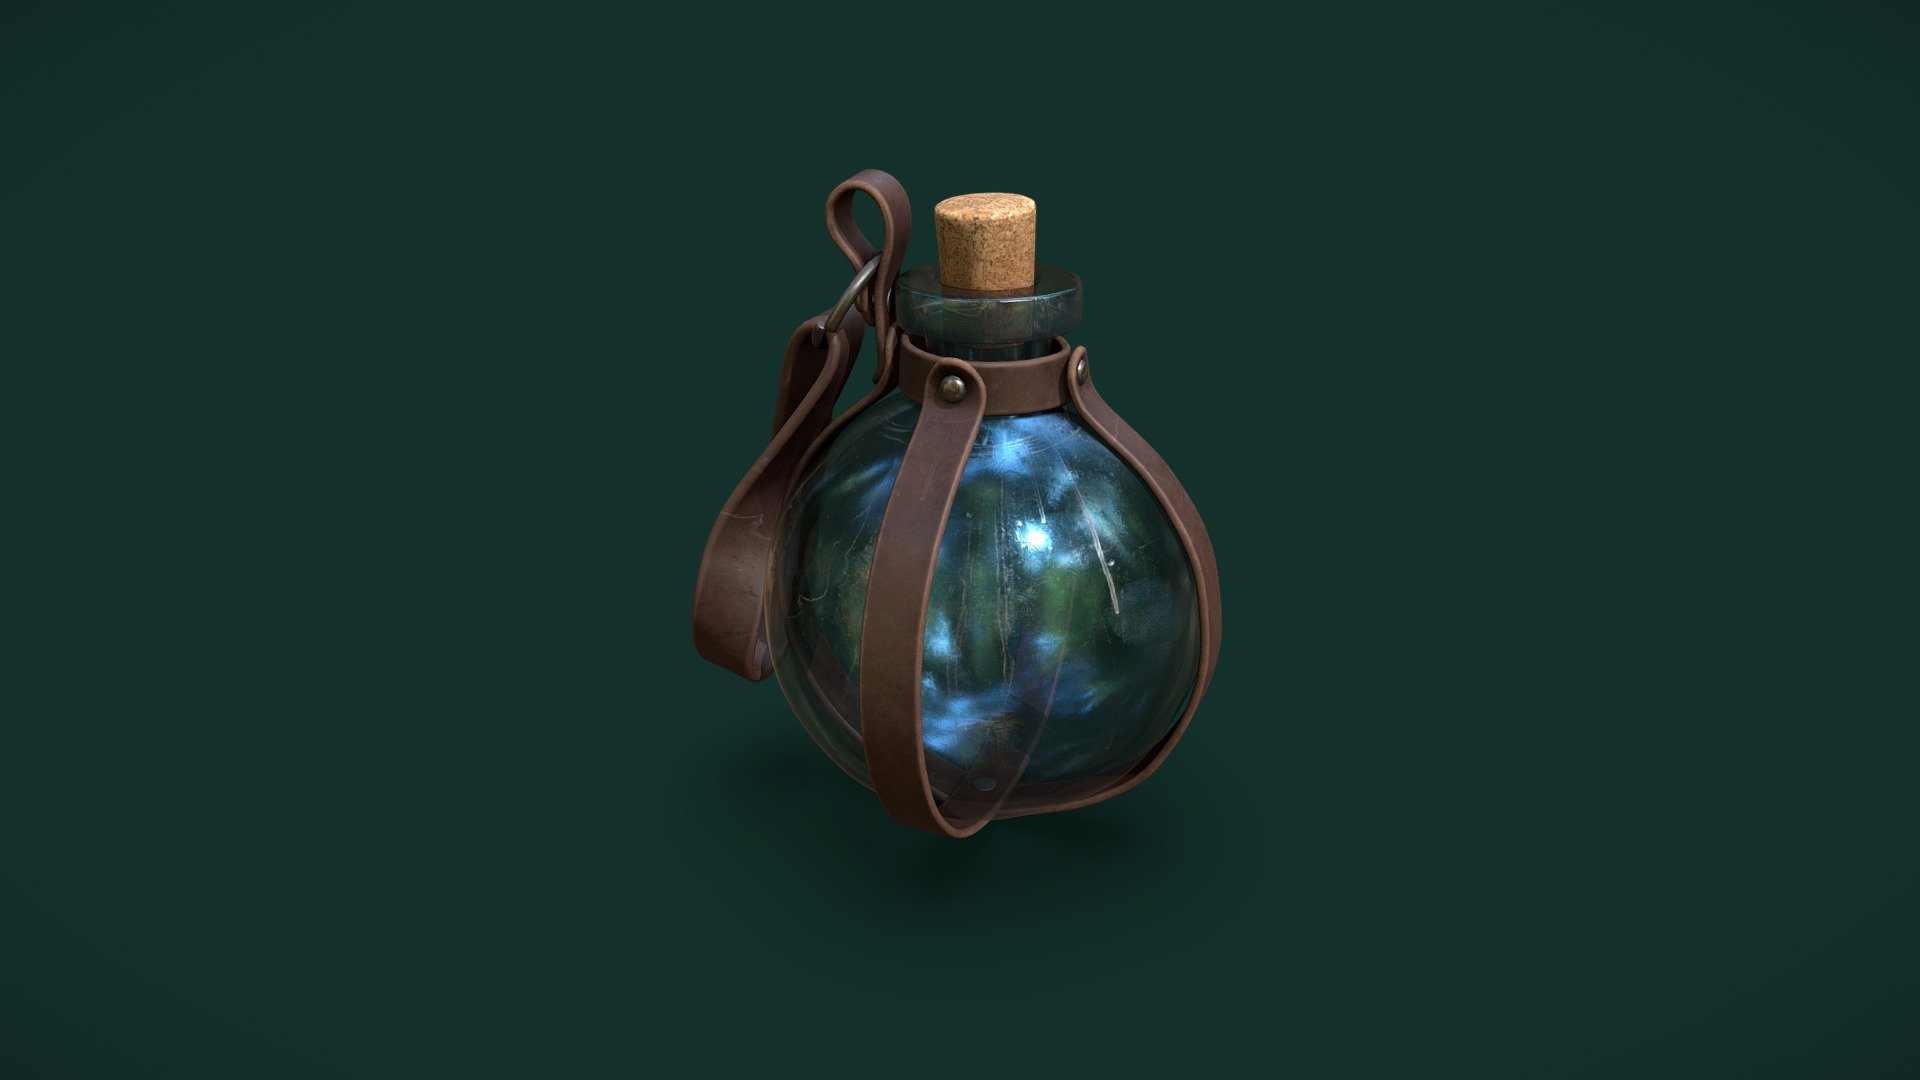 Small potion bottle Potion with leather straps.
Blender/Substance - Small bottle - Download Free 3D model by shuvalov.di 3d model